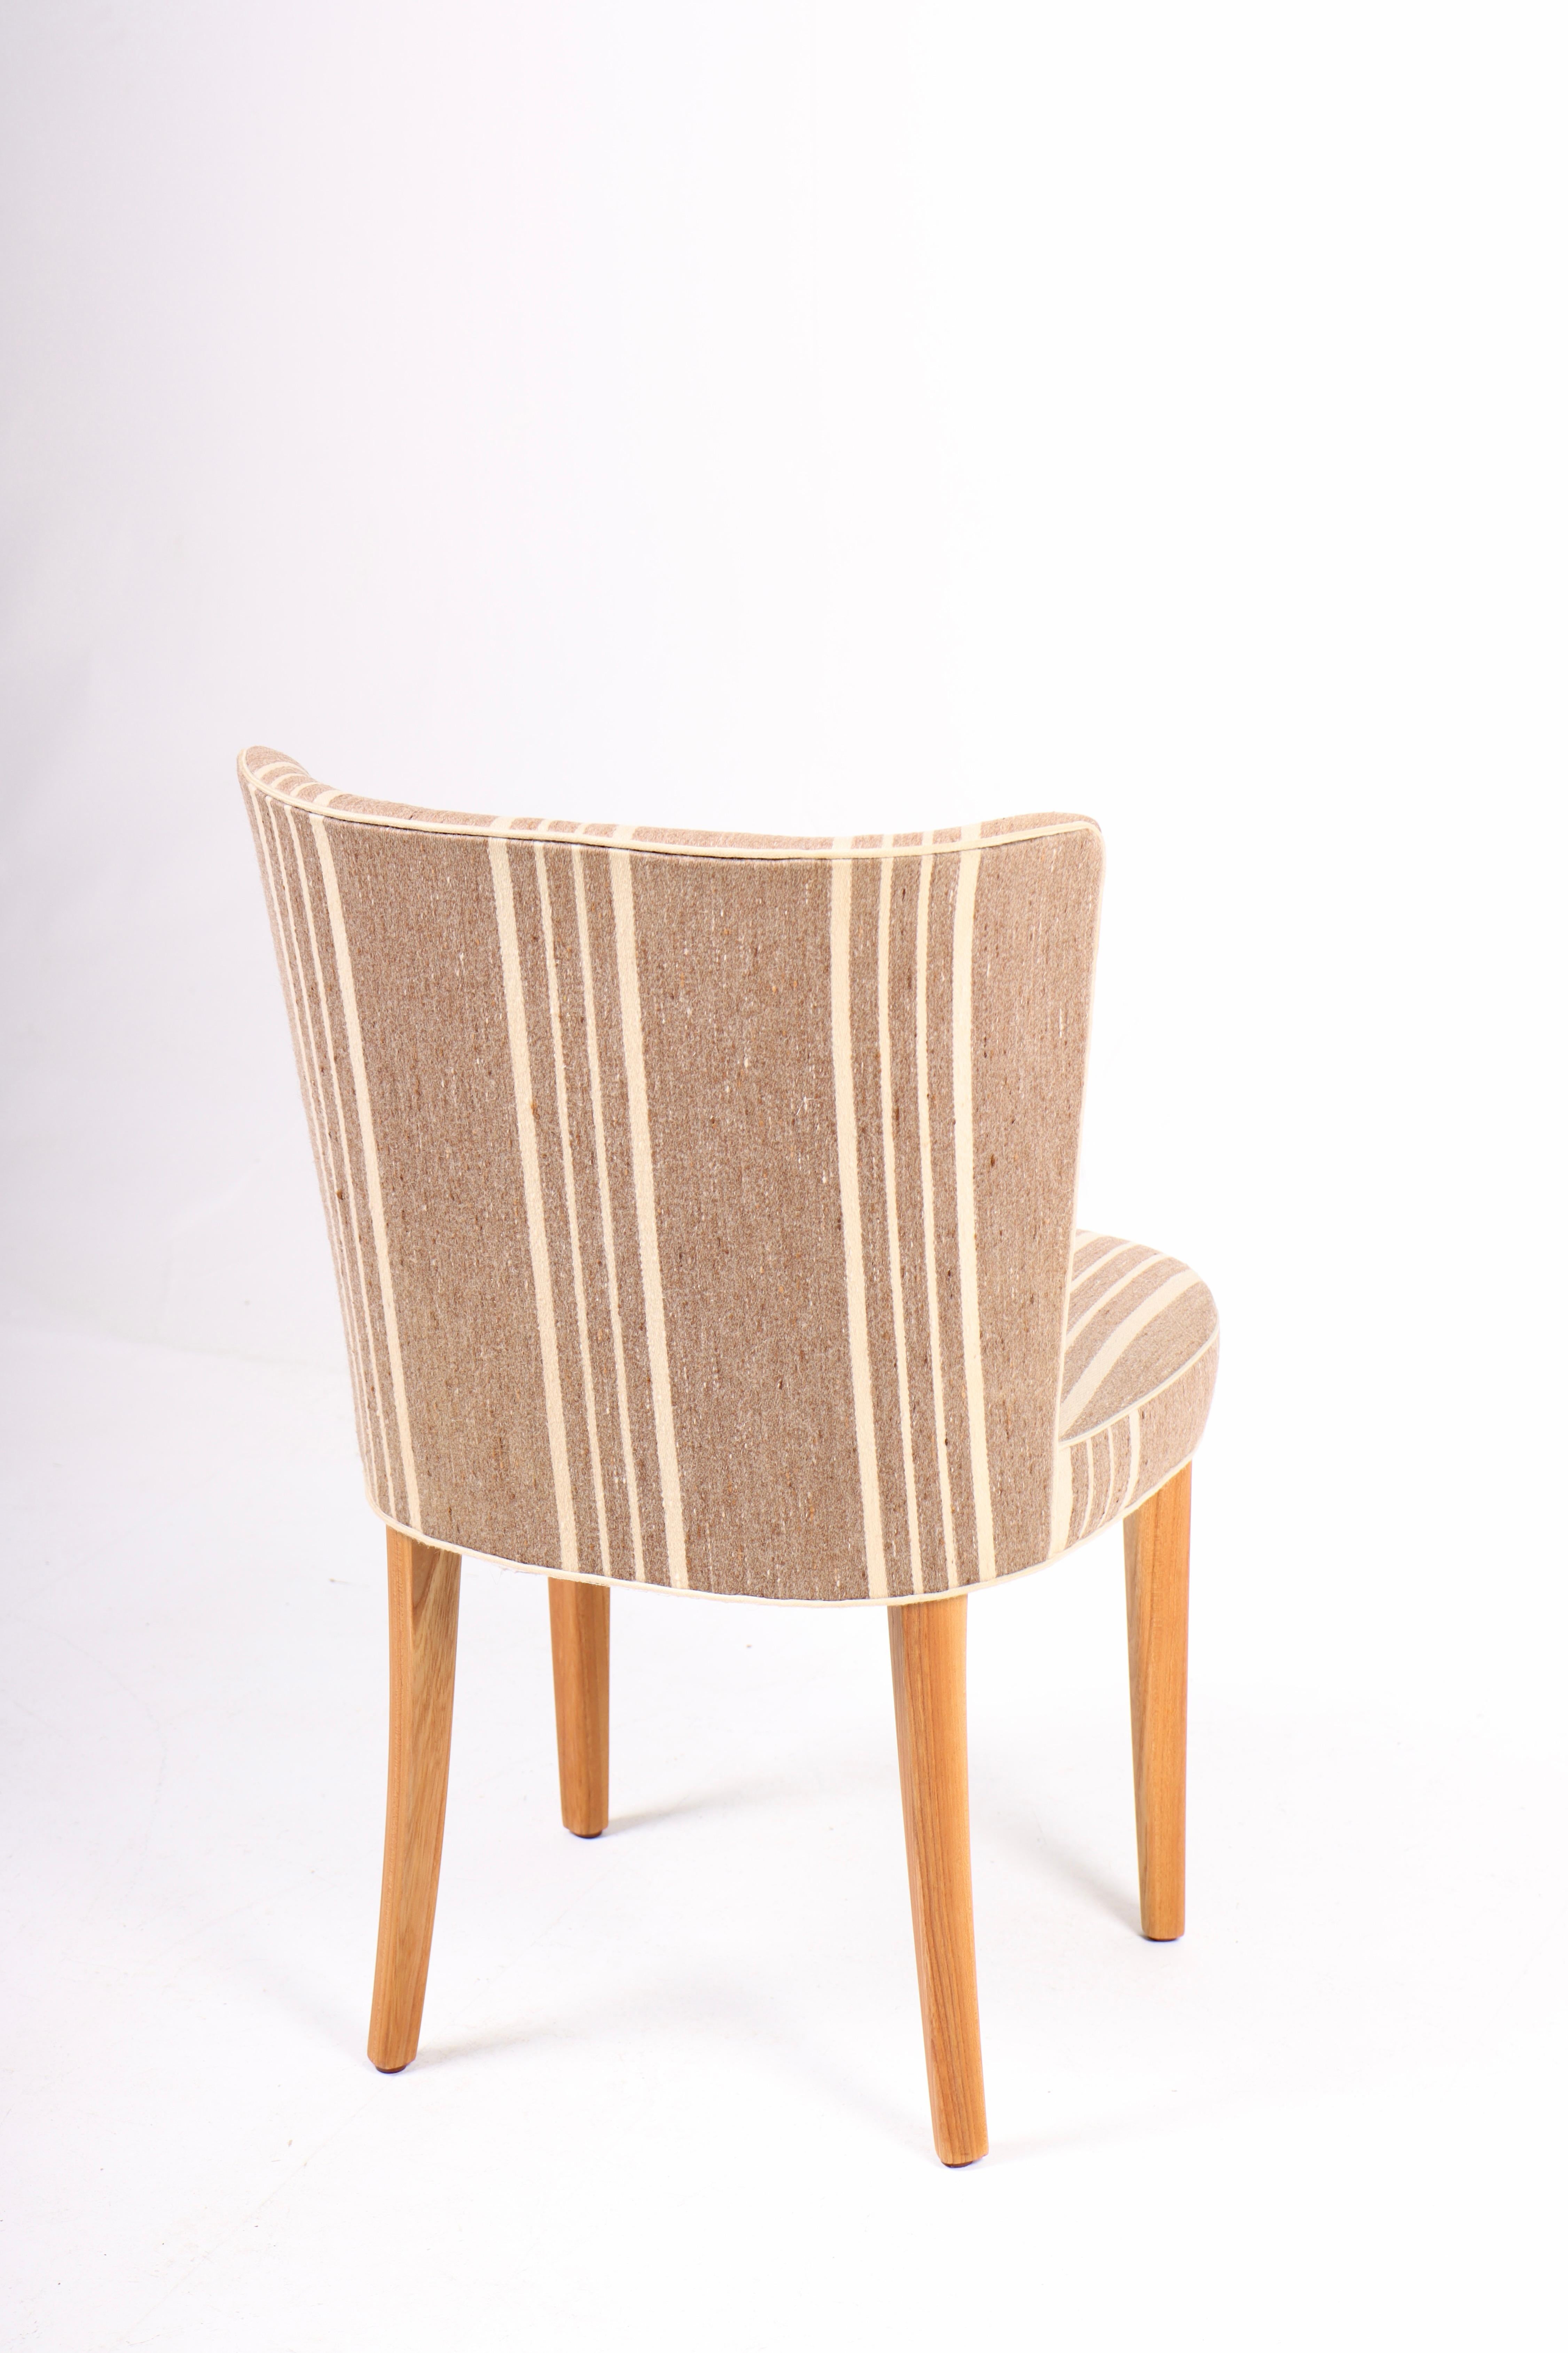 Scandinavian Modern Mid-Century Side Chair by Frode Holm, 1950s